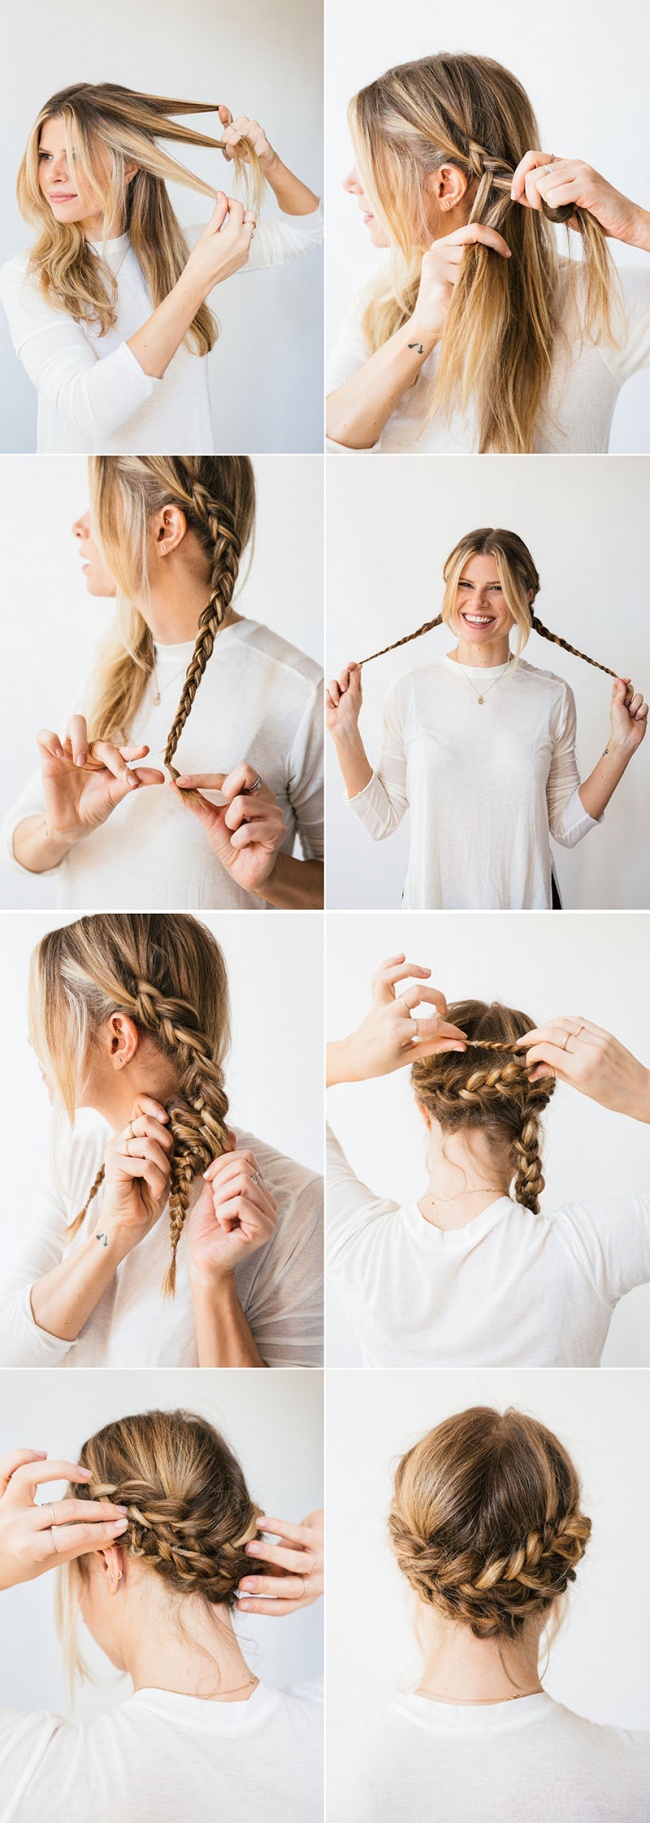 Braided Low Hairdo for Stunning Summer Look